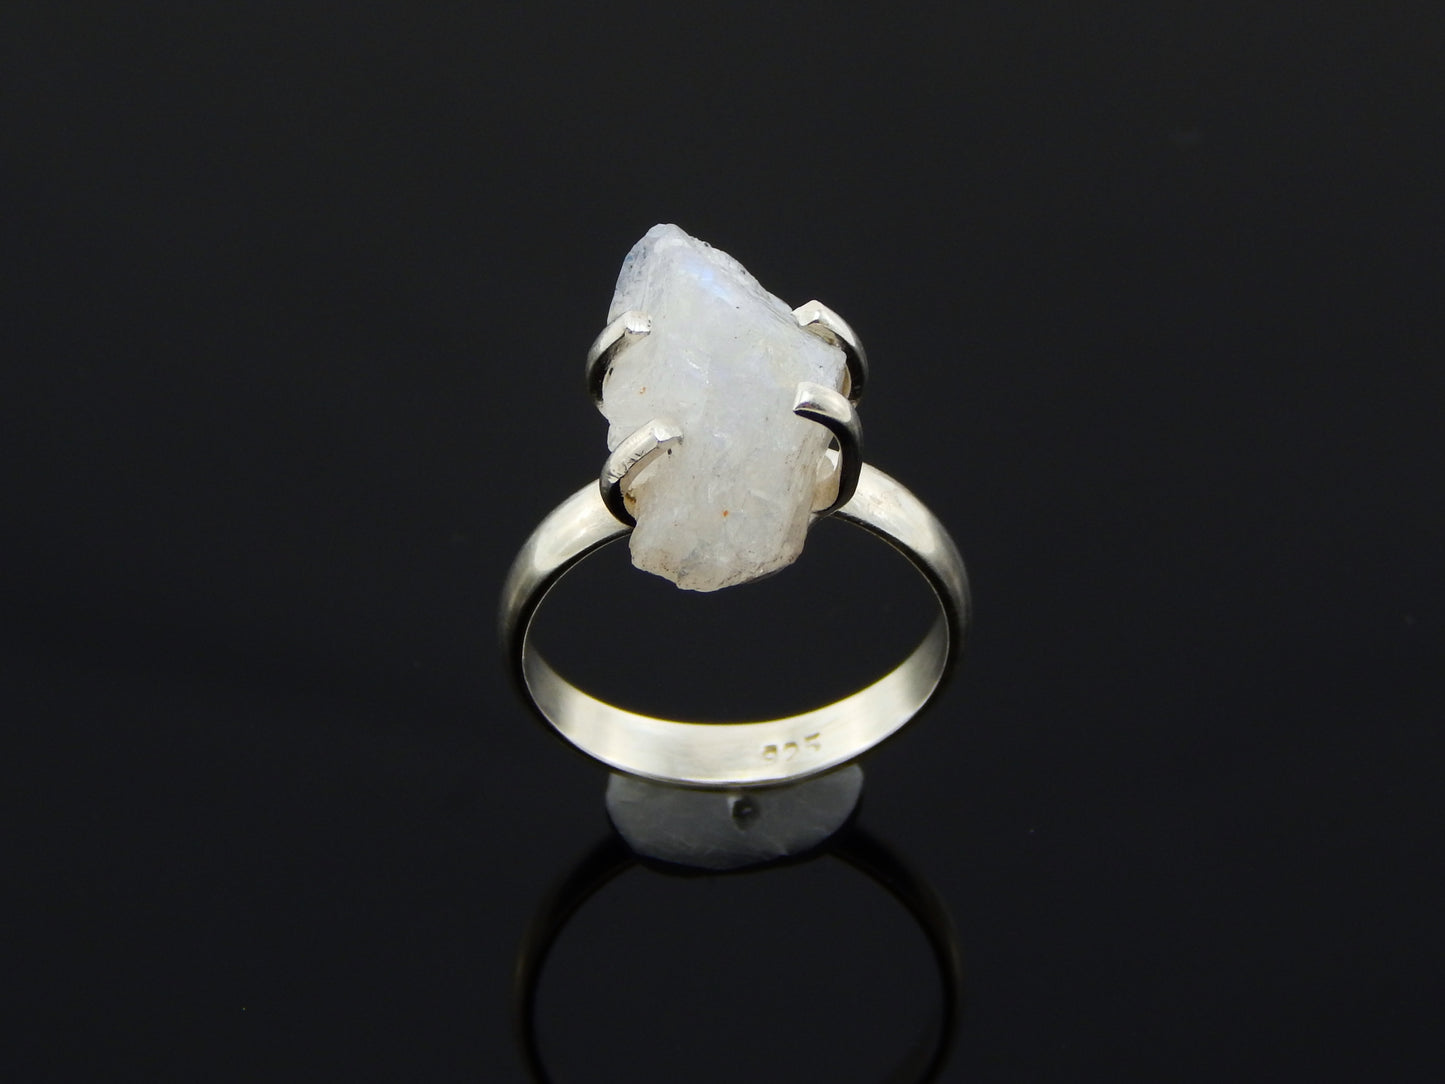 Natural Rough Cut Moonstone Ring in 925 Sterling Silver